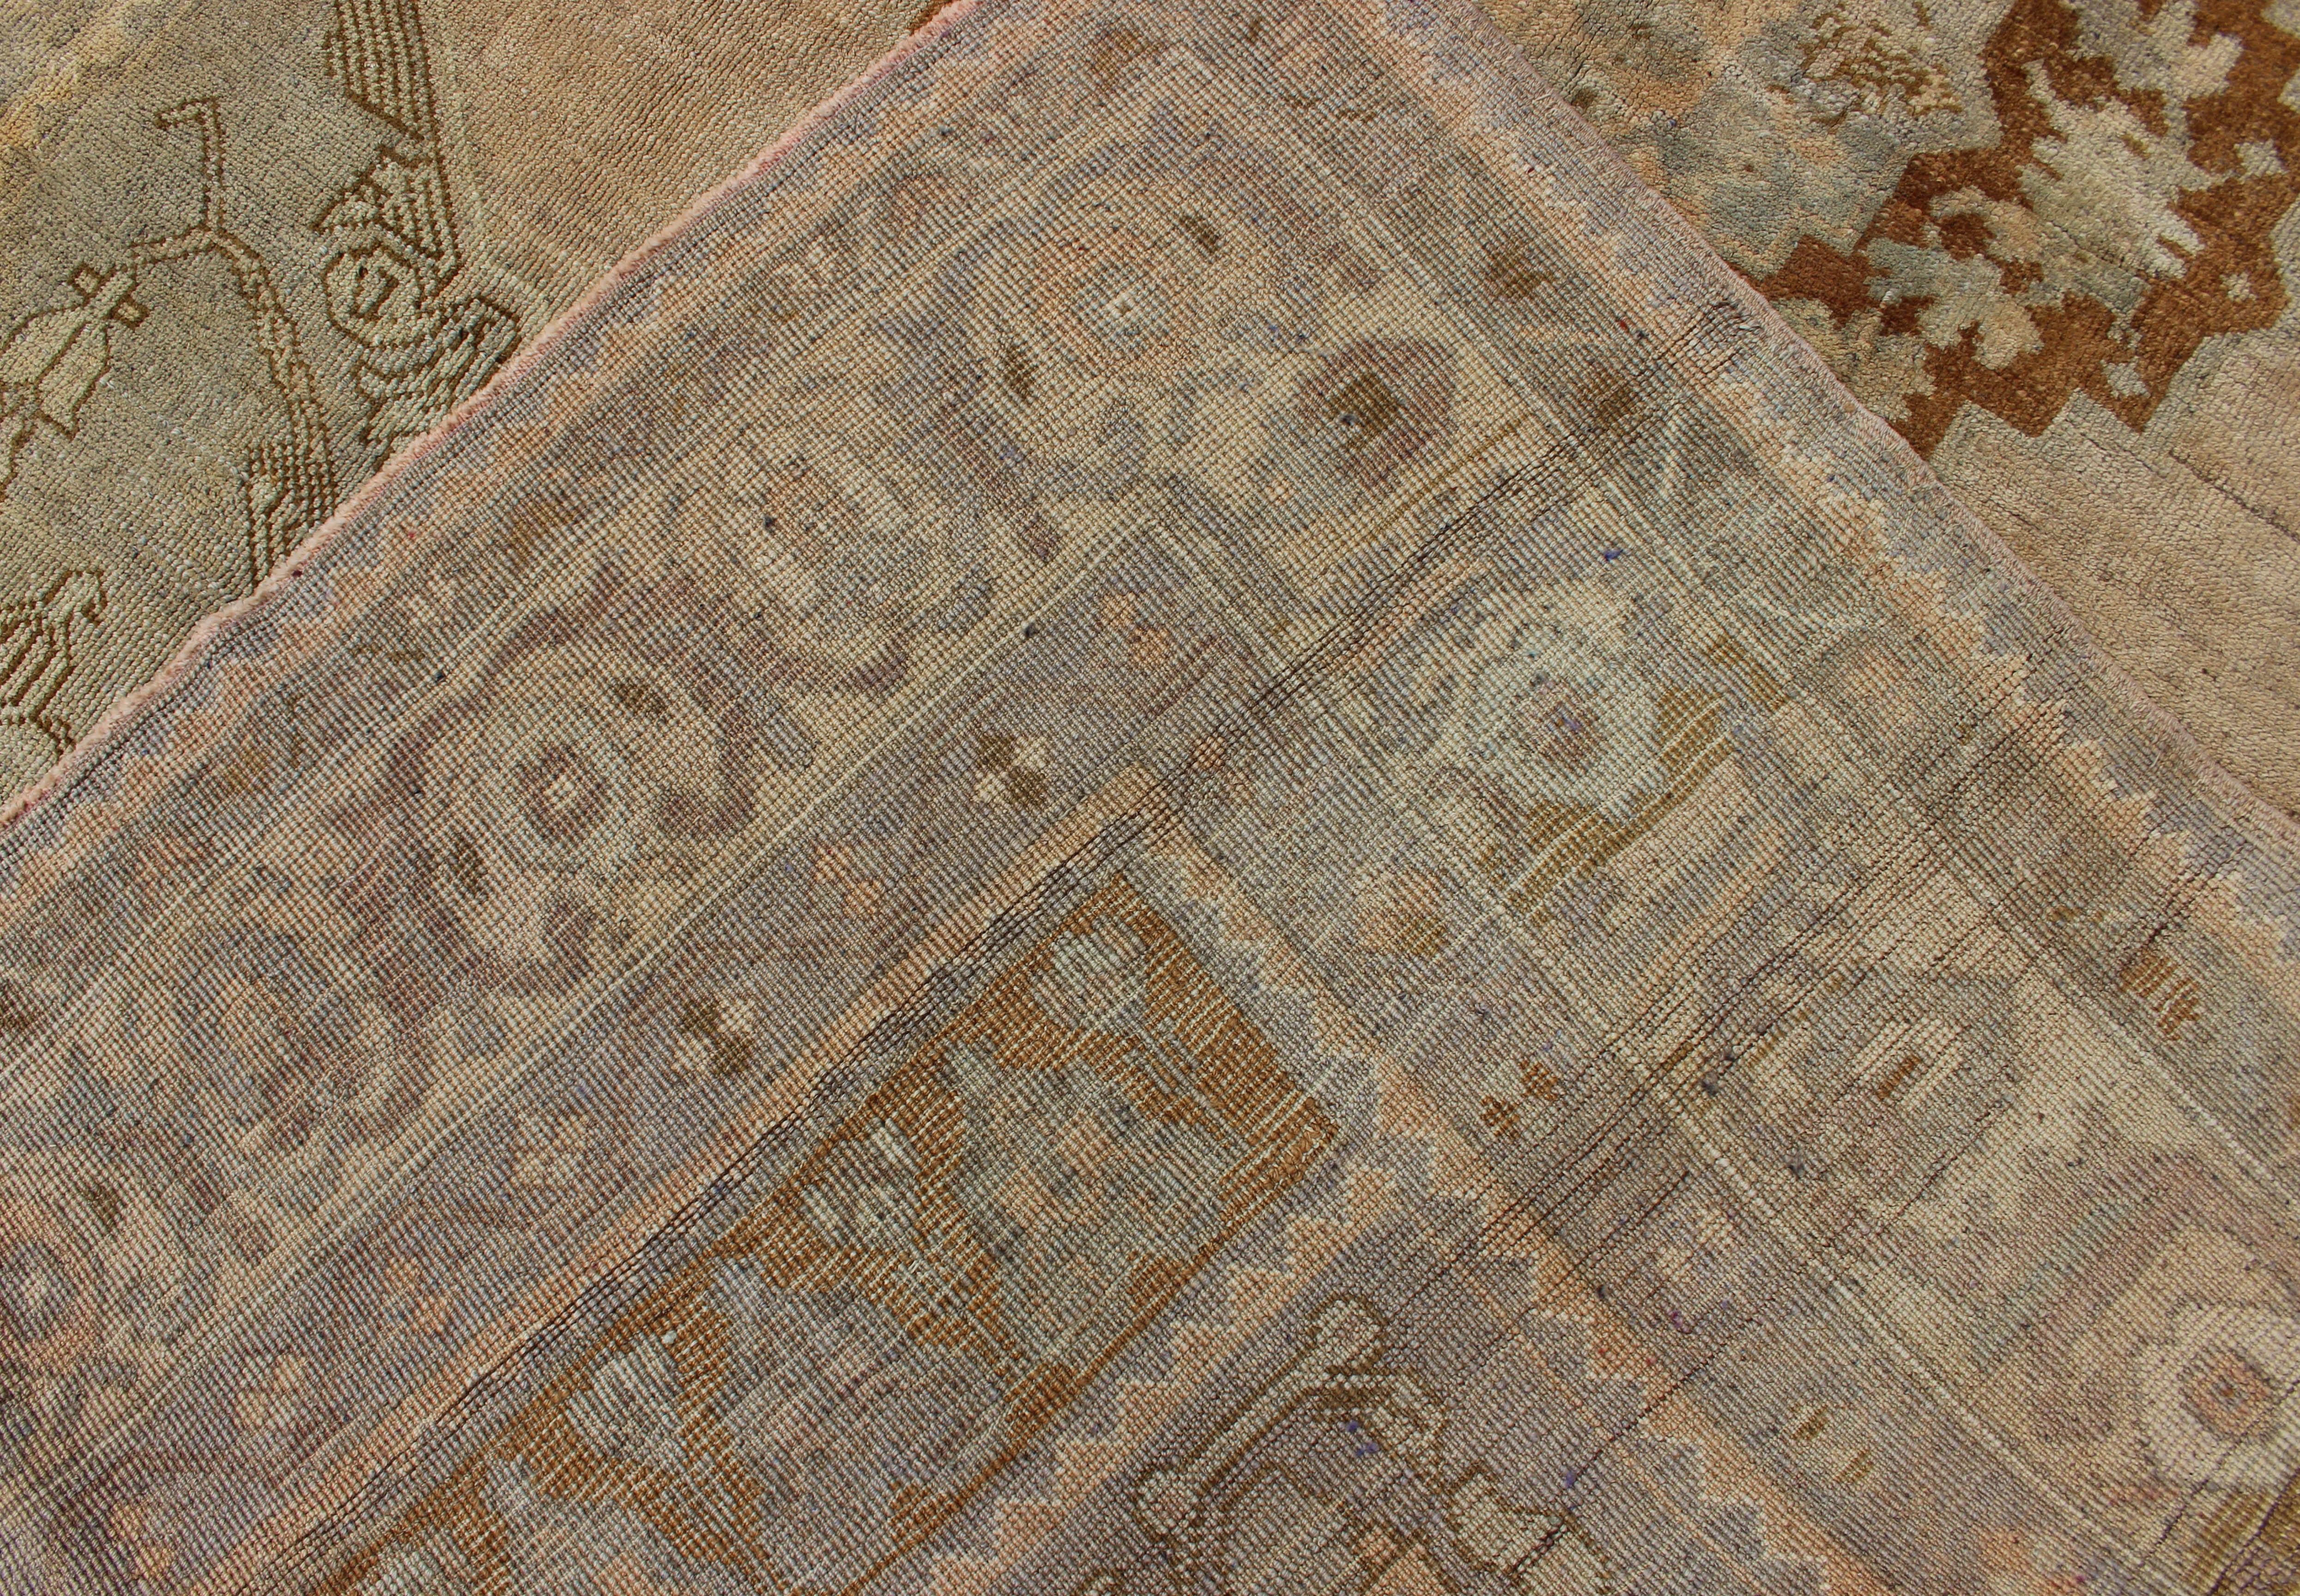 Unique Turkish Oushak Rug with Muted Colors in Taupe, Gray, Ice Blue and L.Green For Sale 5